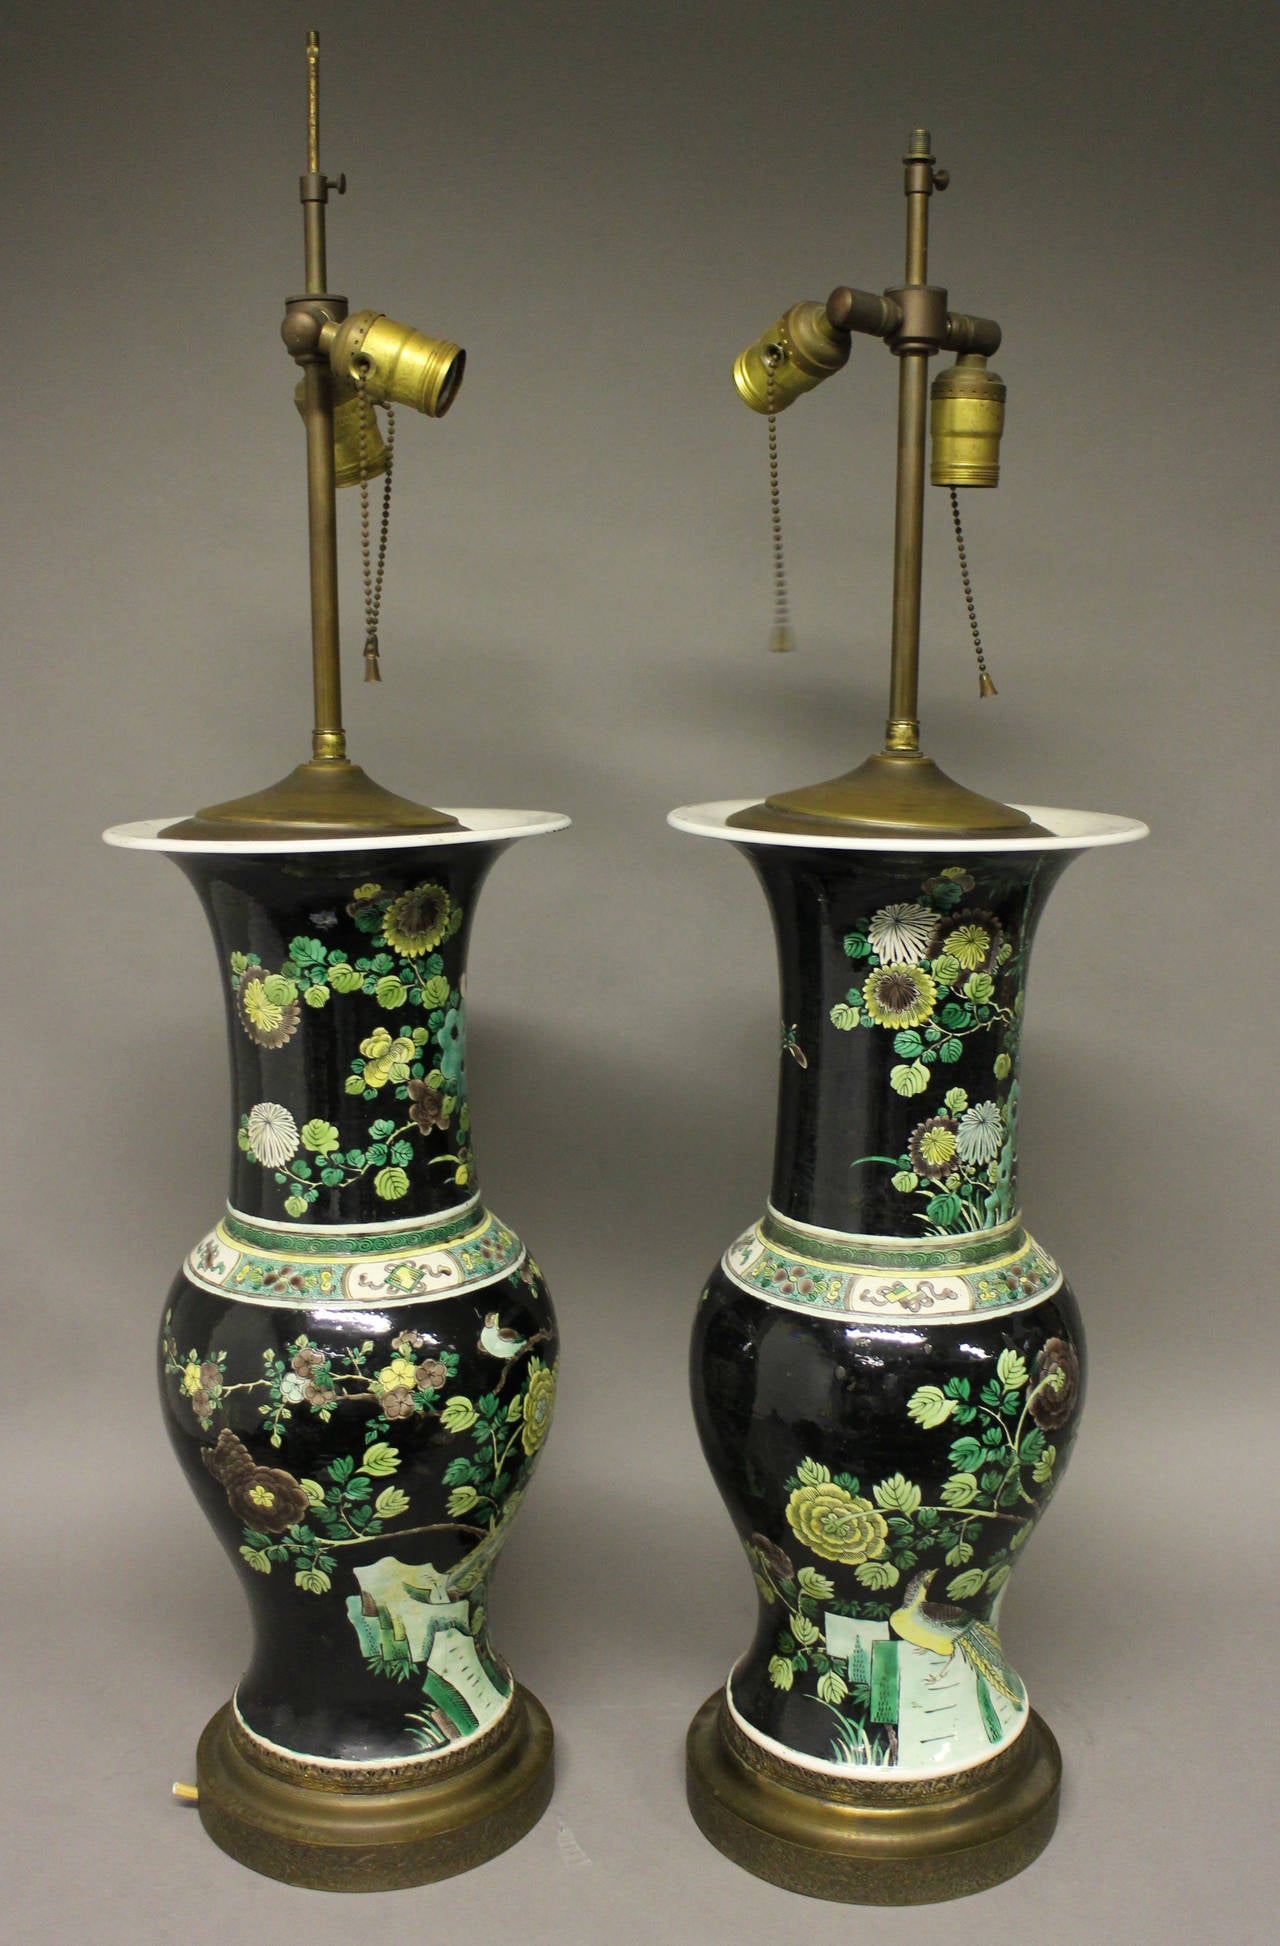 A pair of Chinese famille nior lamps, decorated with a scene of birds in a forest. The lamp fittings are included, but will need rewiring. 

Height of vases 17.5